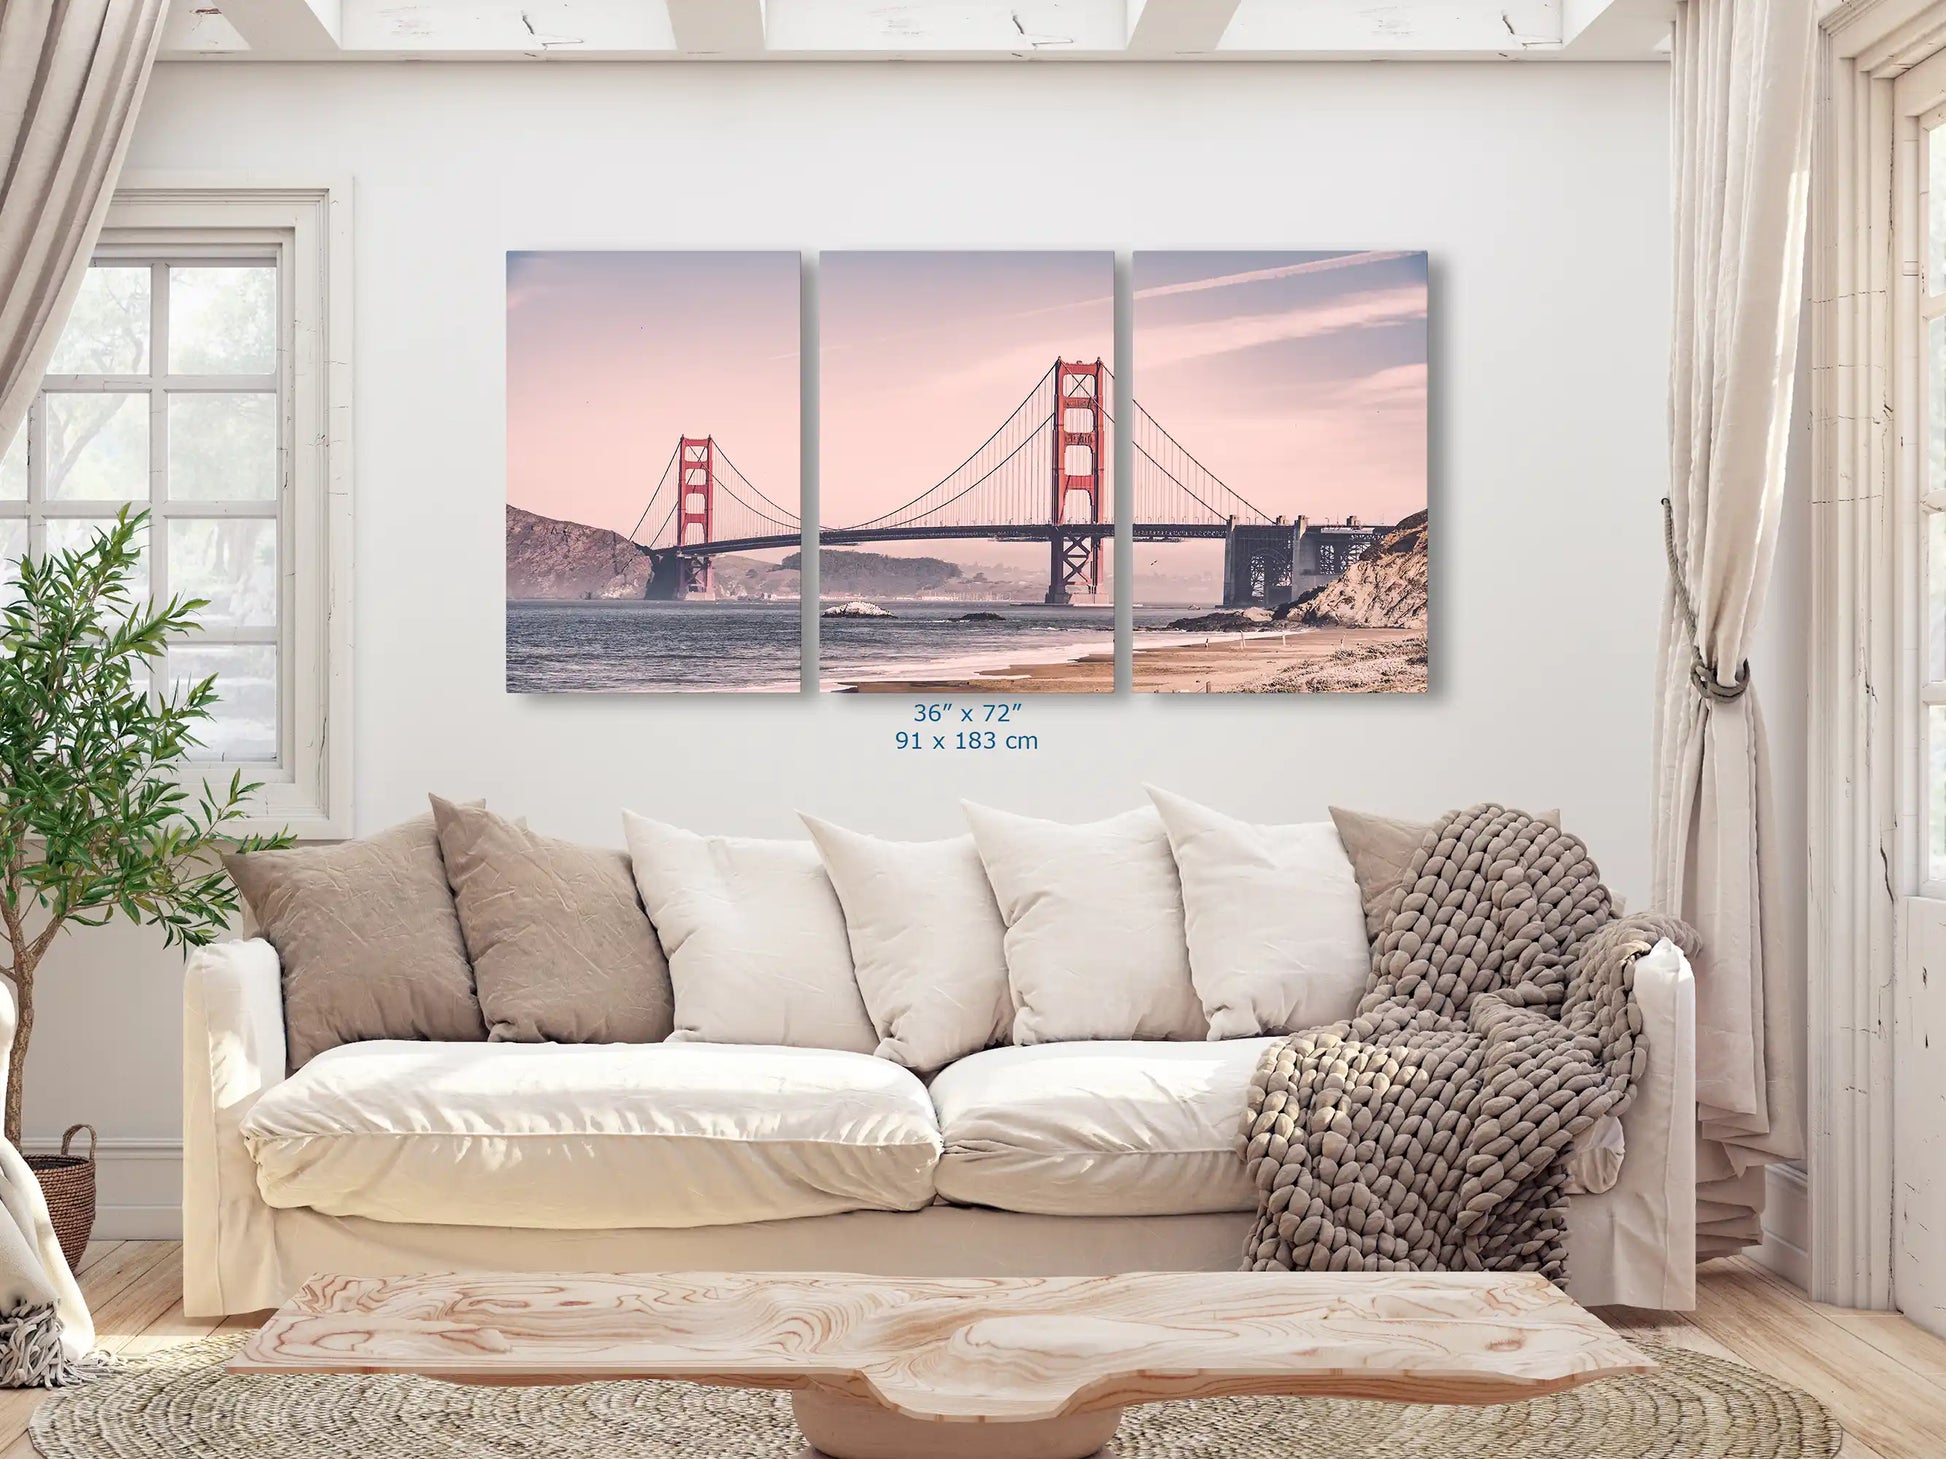 A 36x72-inch triptych canvas set displaying the Golden Gate Bridge in a vintage style, spanned across a living room wall, enhancing the space with a touch of history.